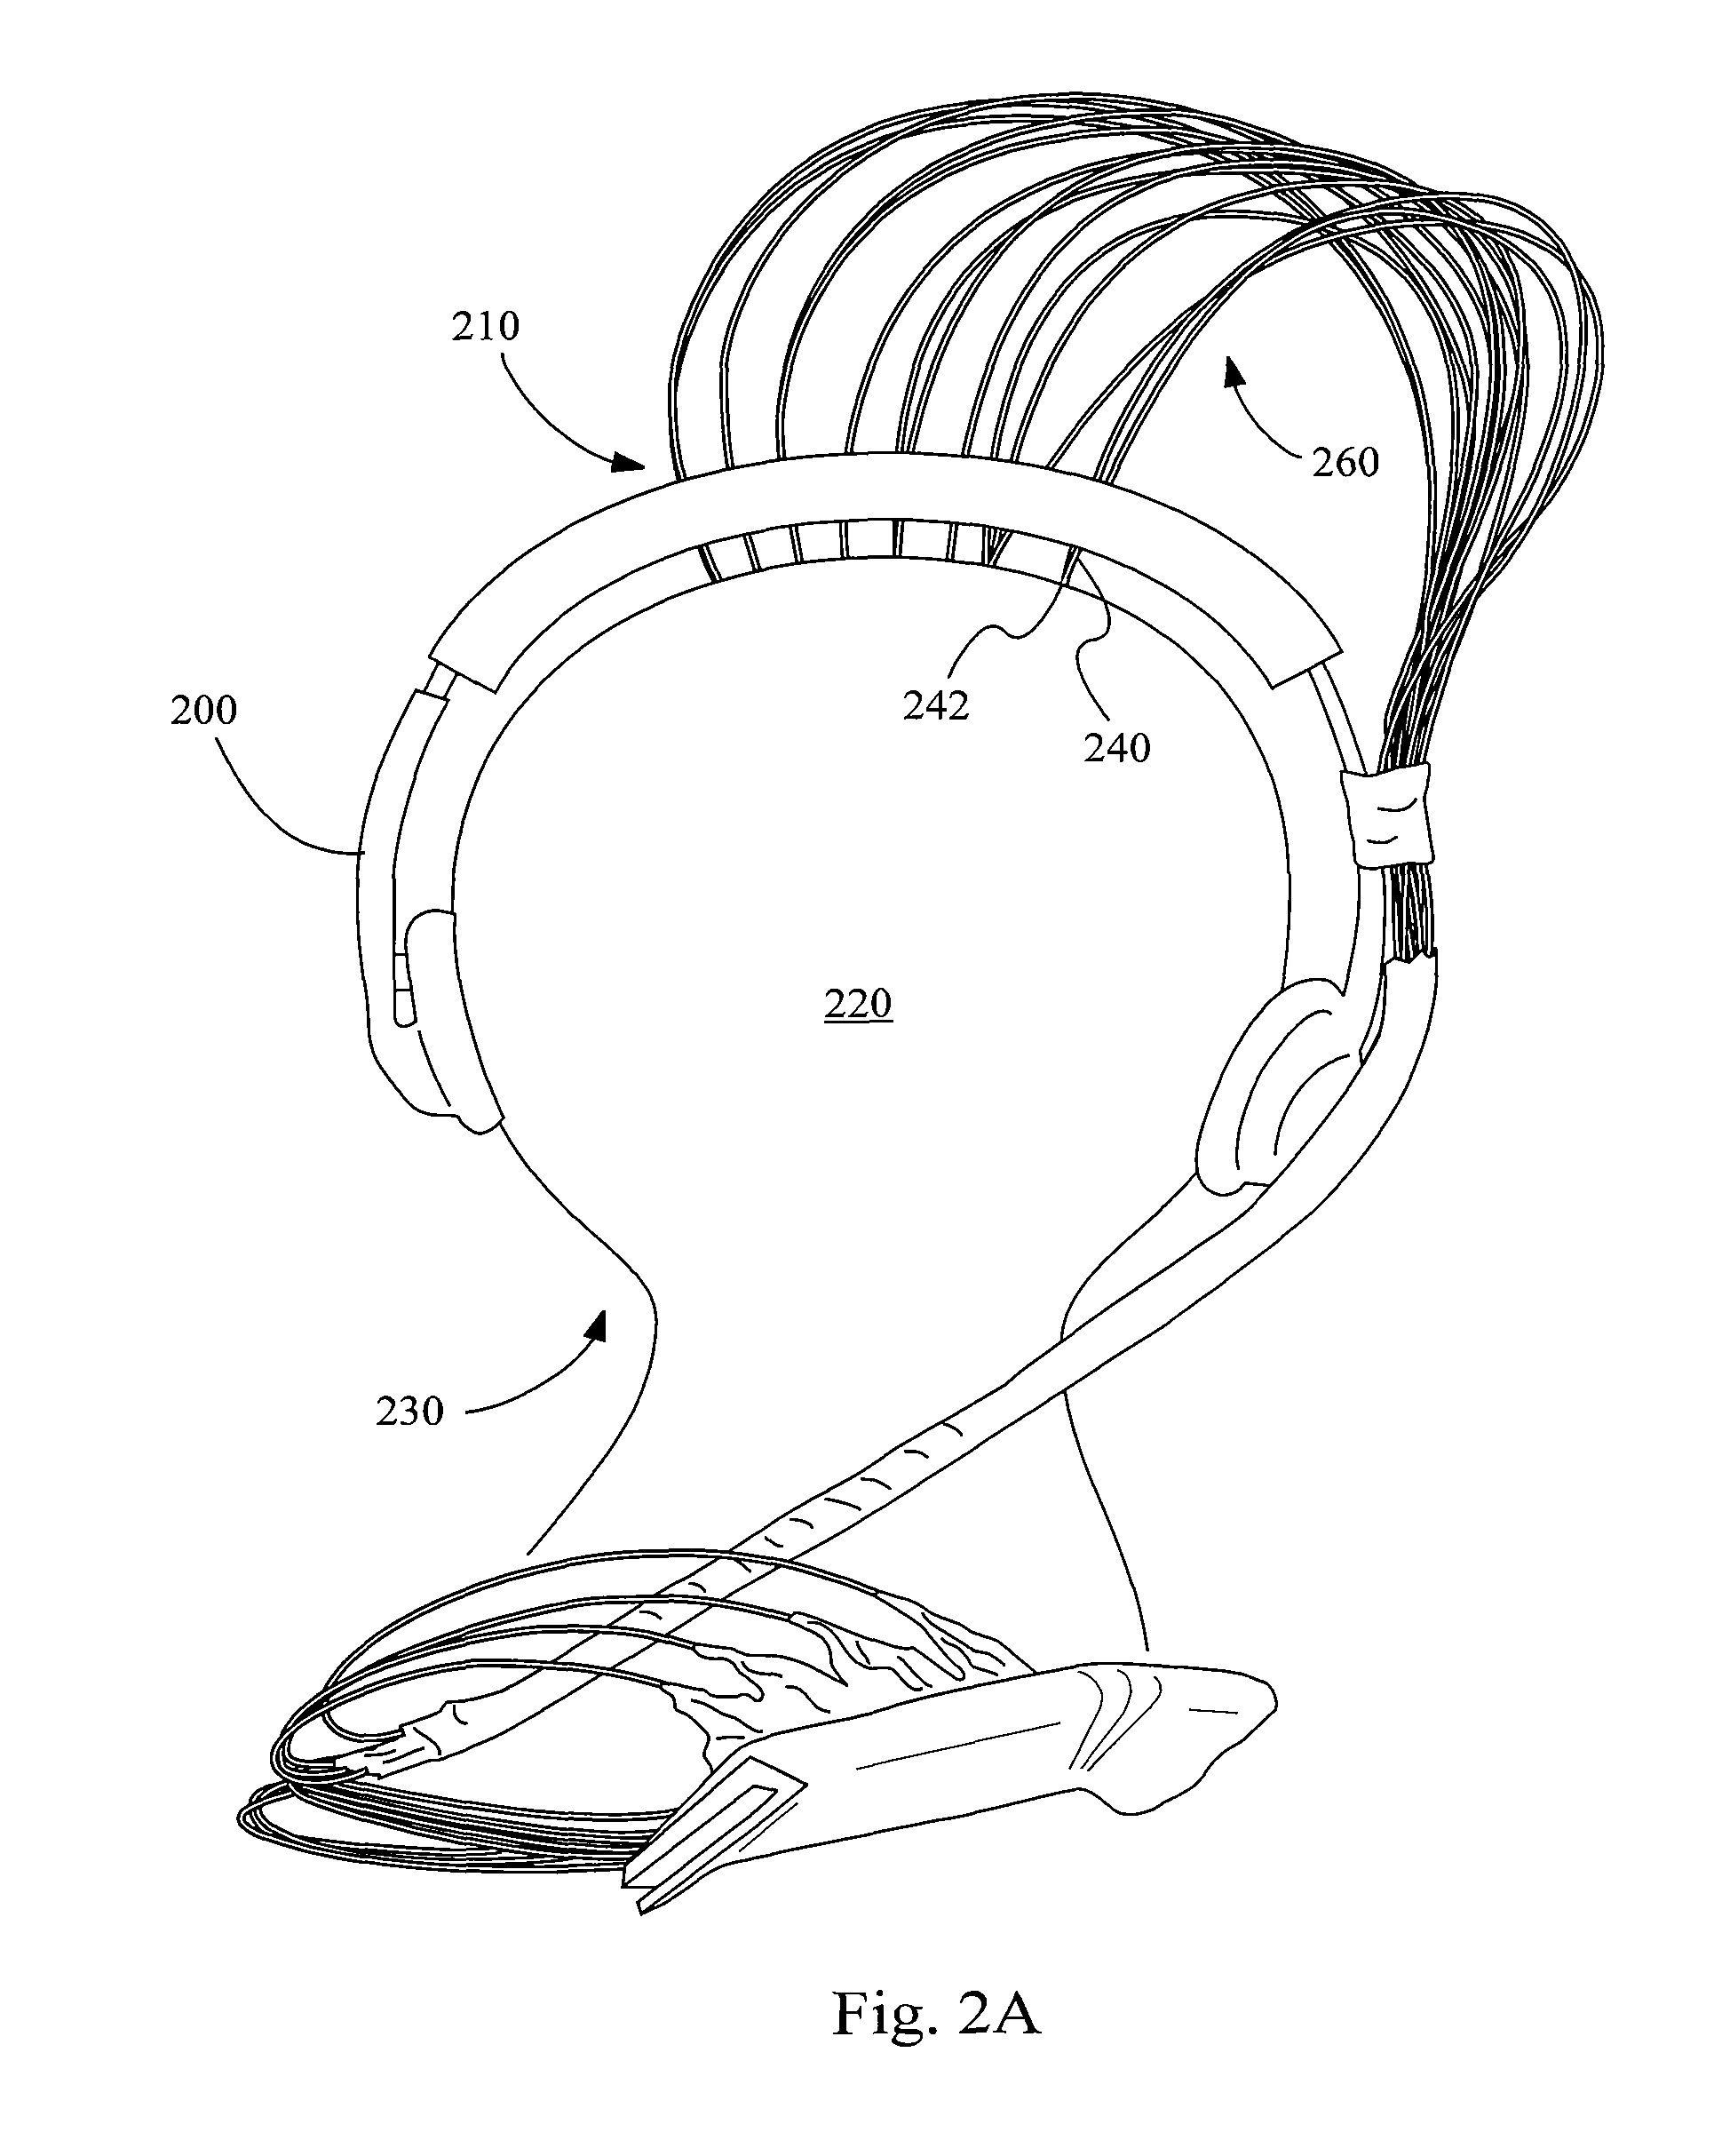 Brain imaging system and methods for direct prosthesis control